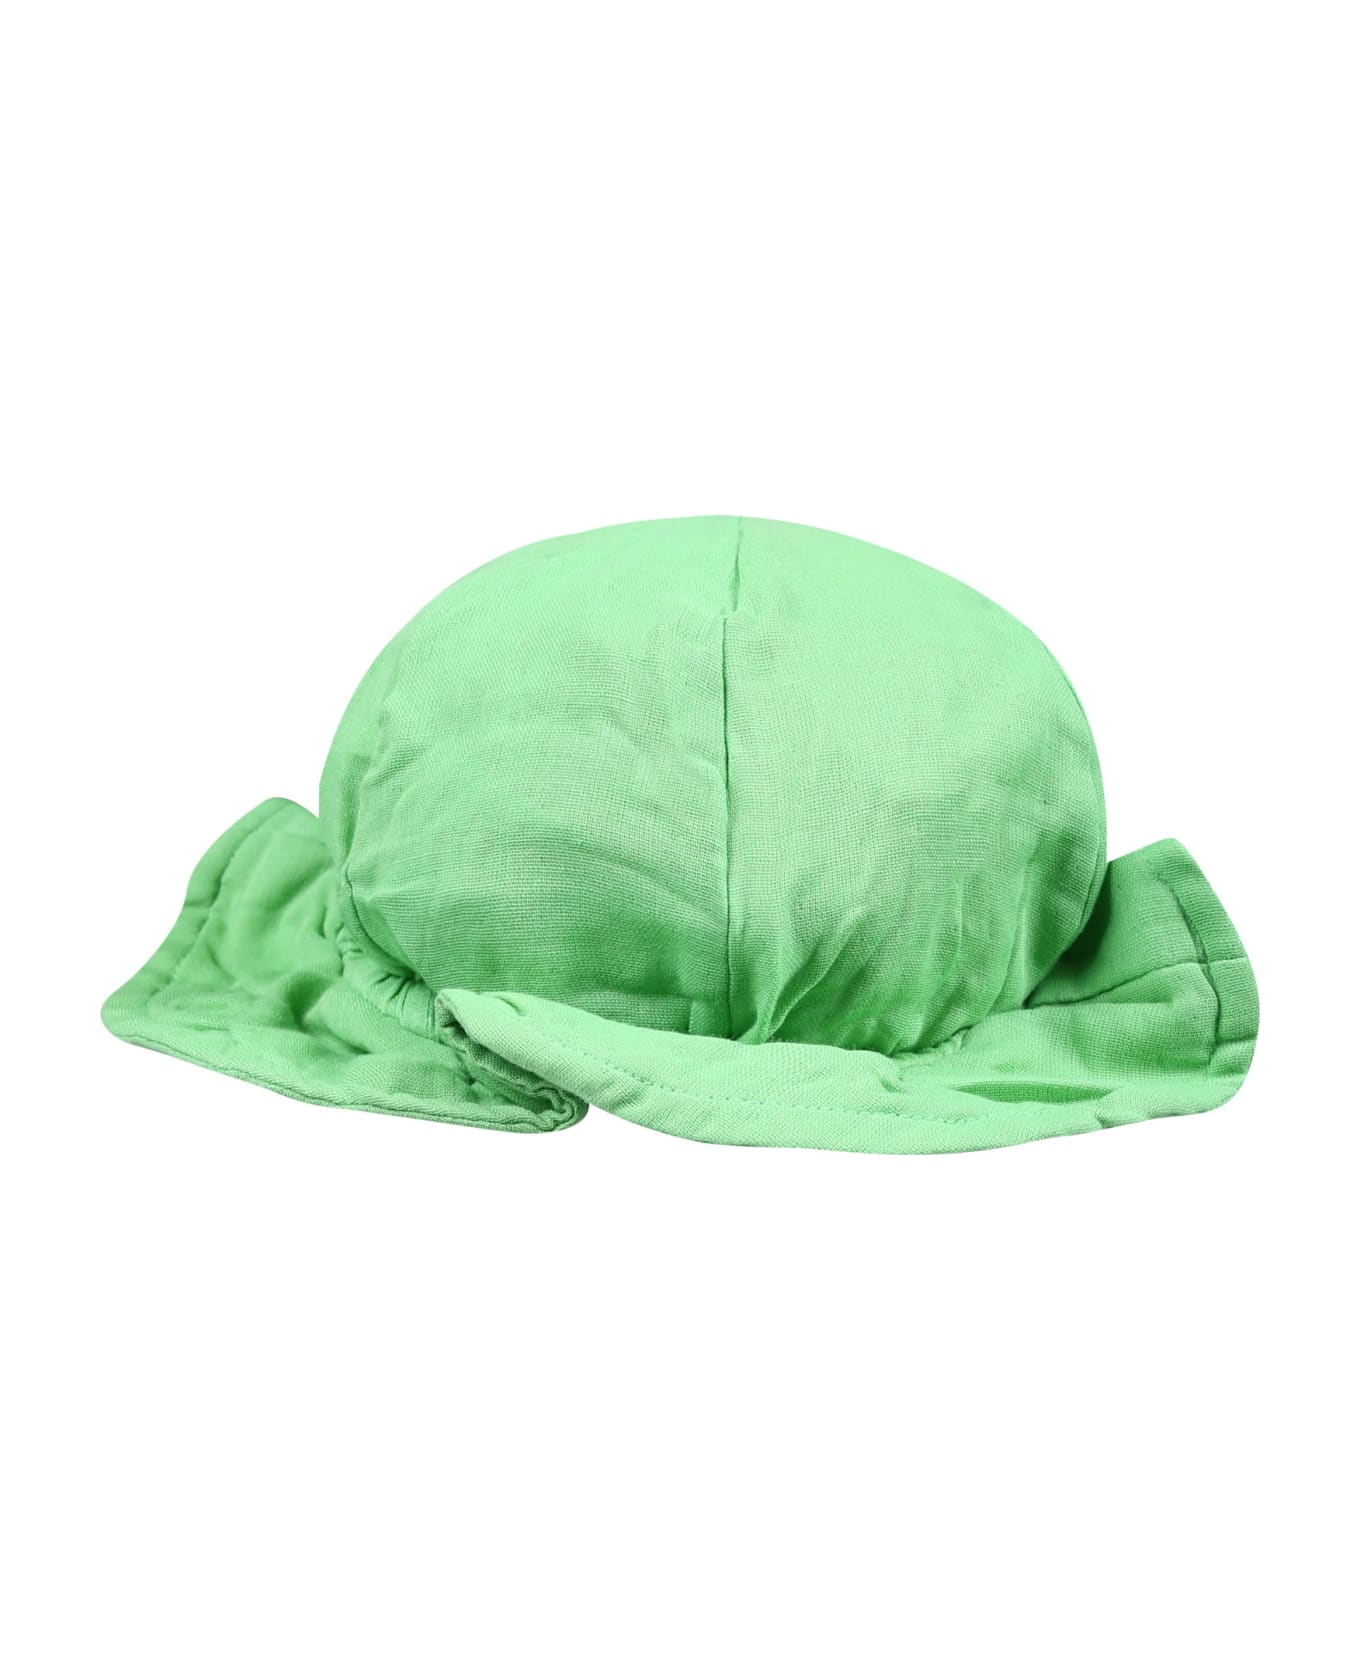 Molo Green Cloche For Kids With Smile - Green